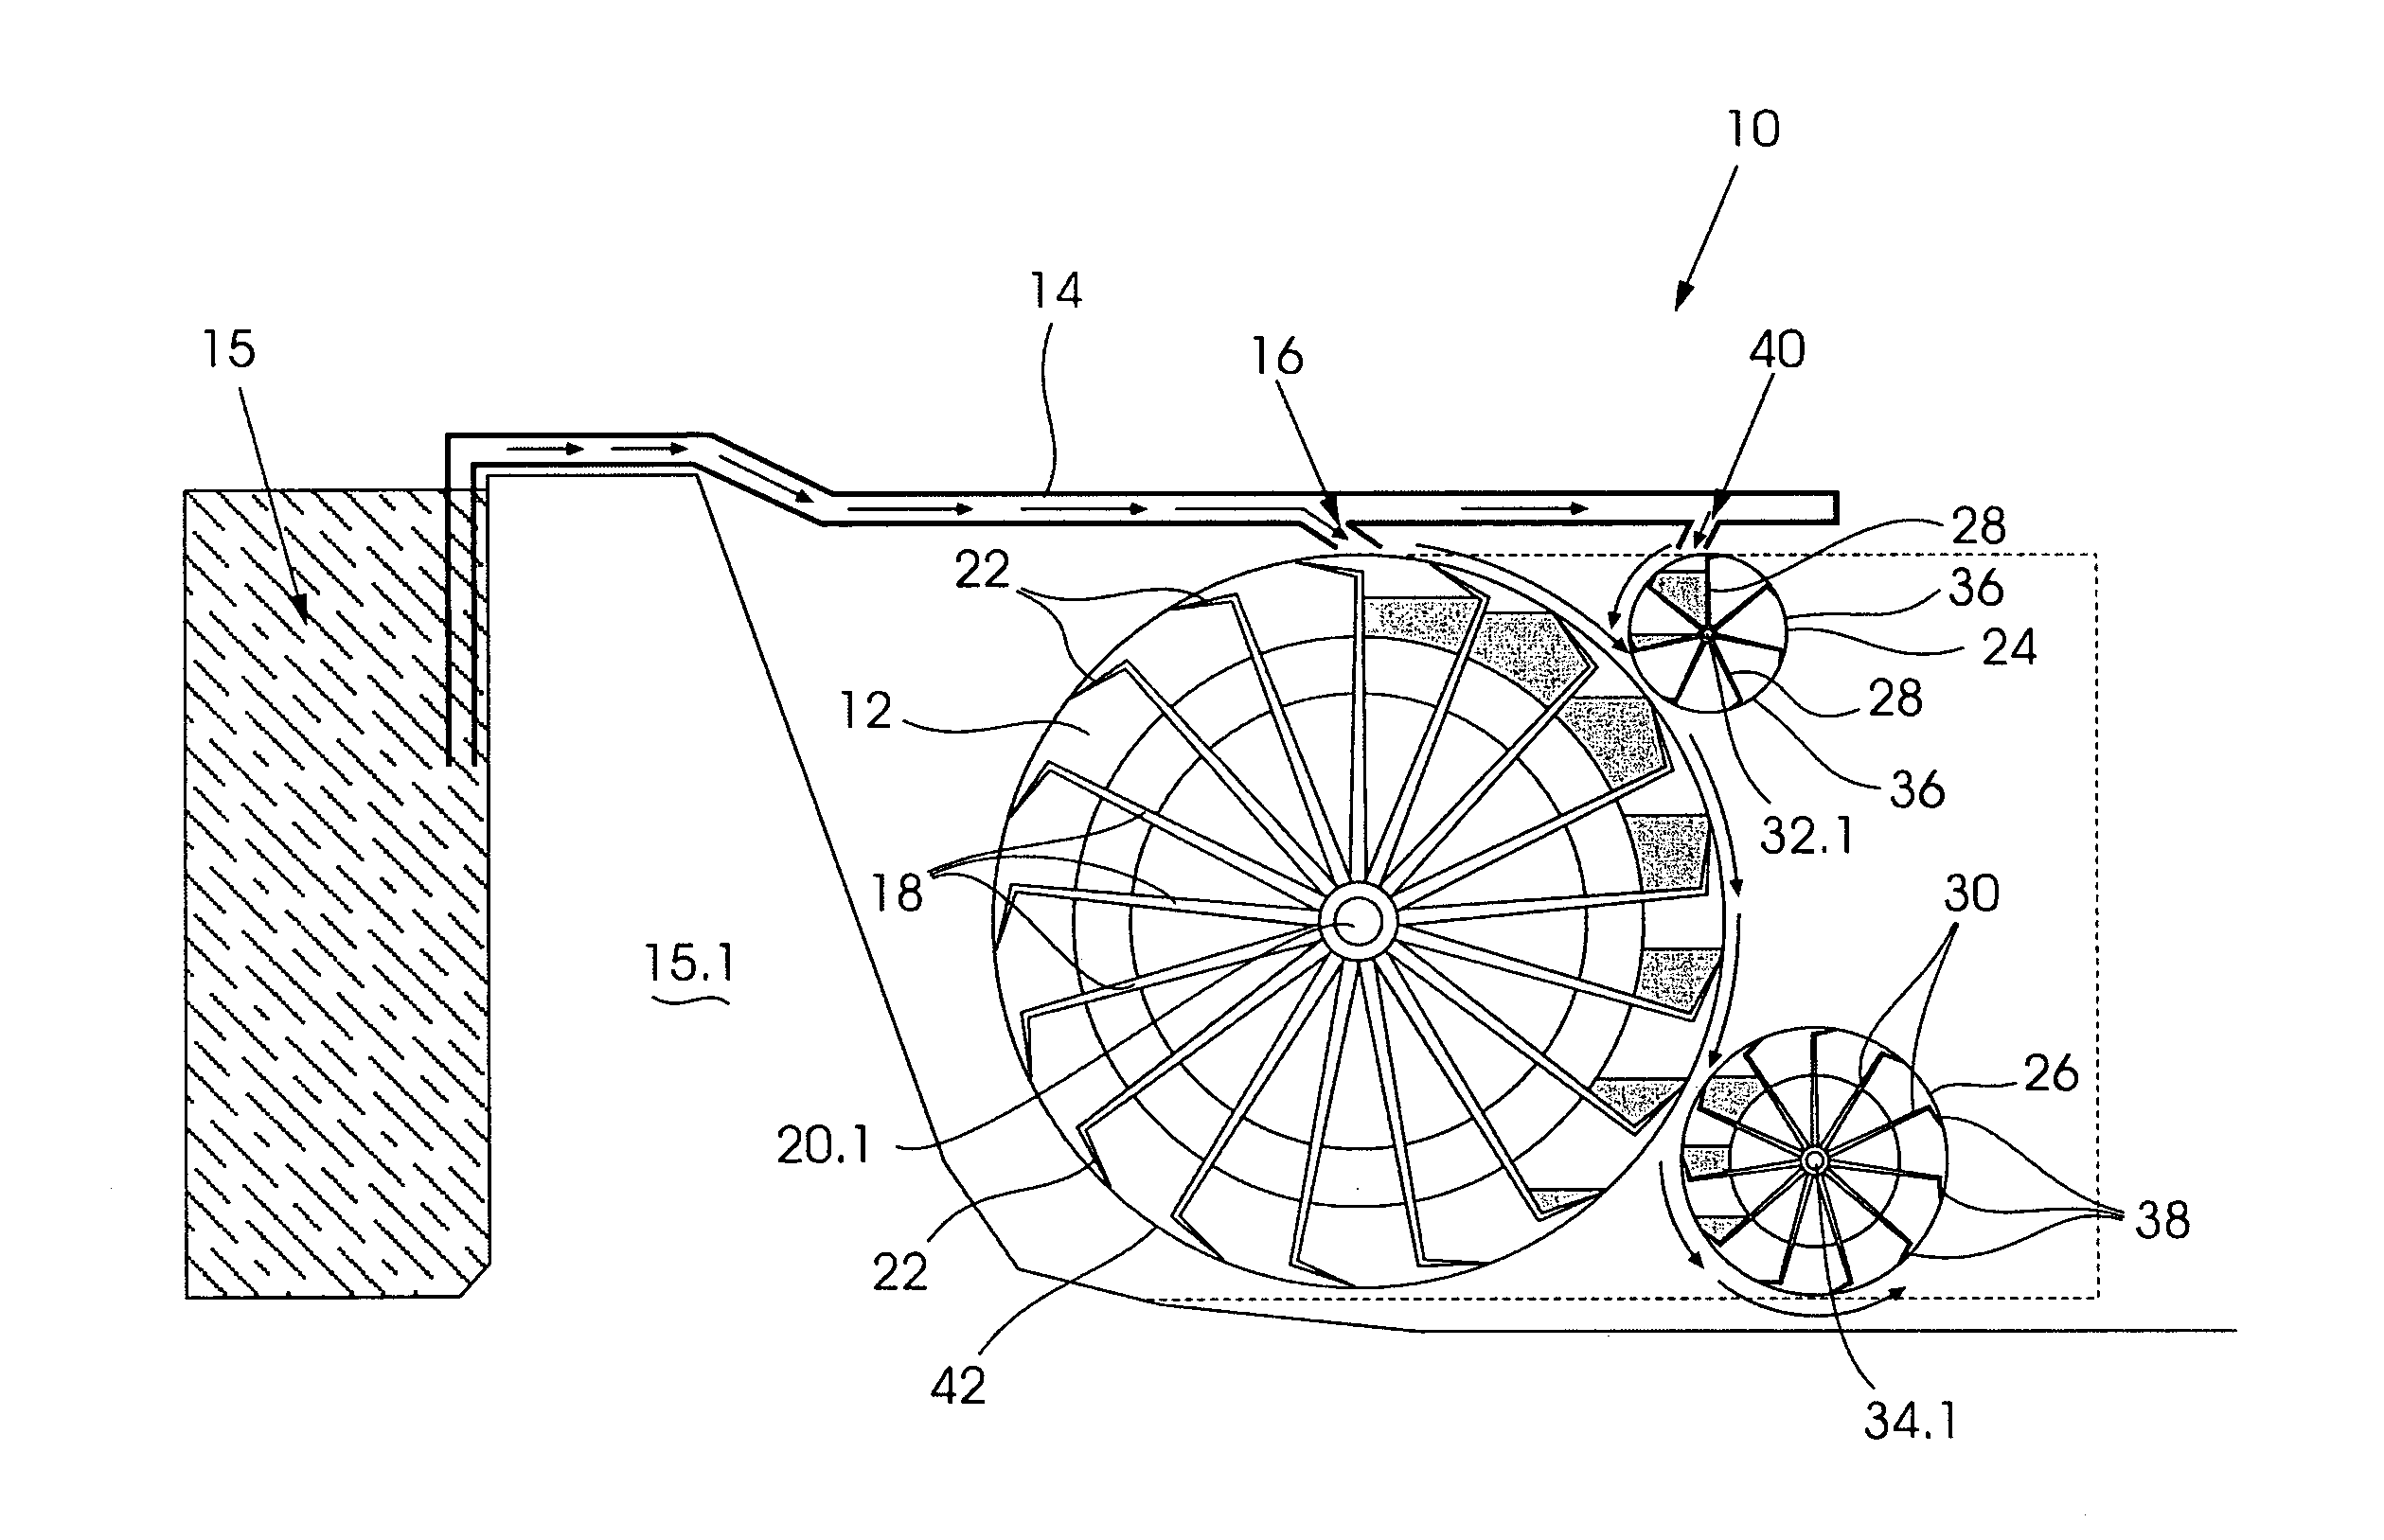 Energy generating system using a plurality of waterwheels